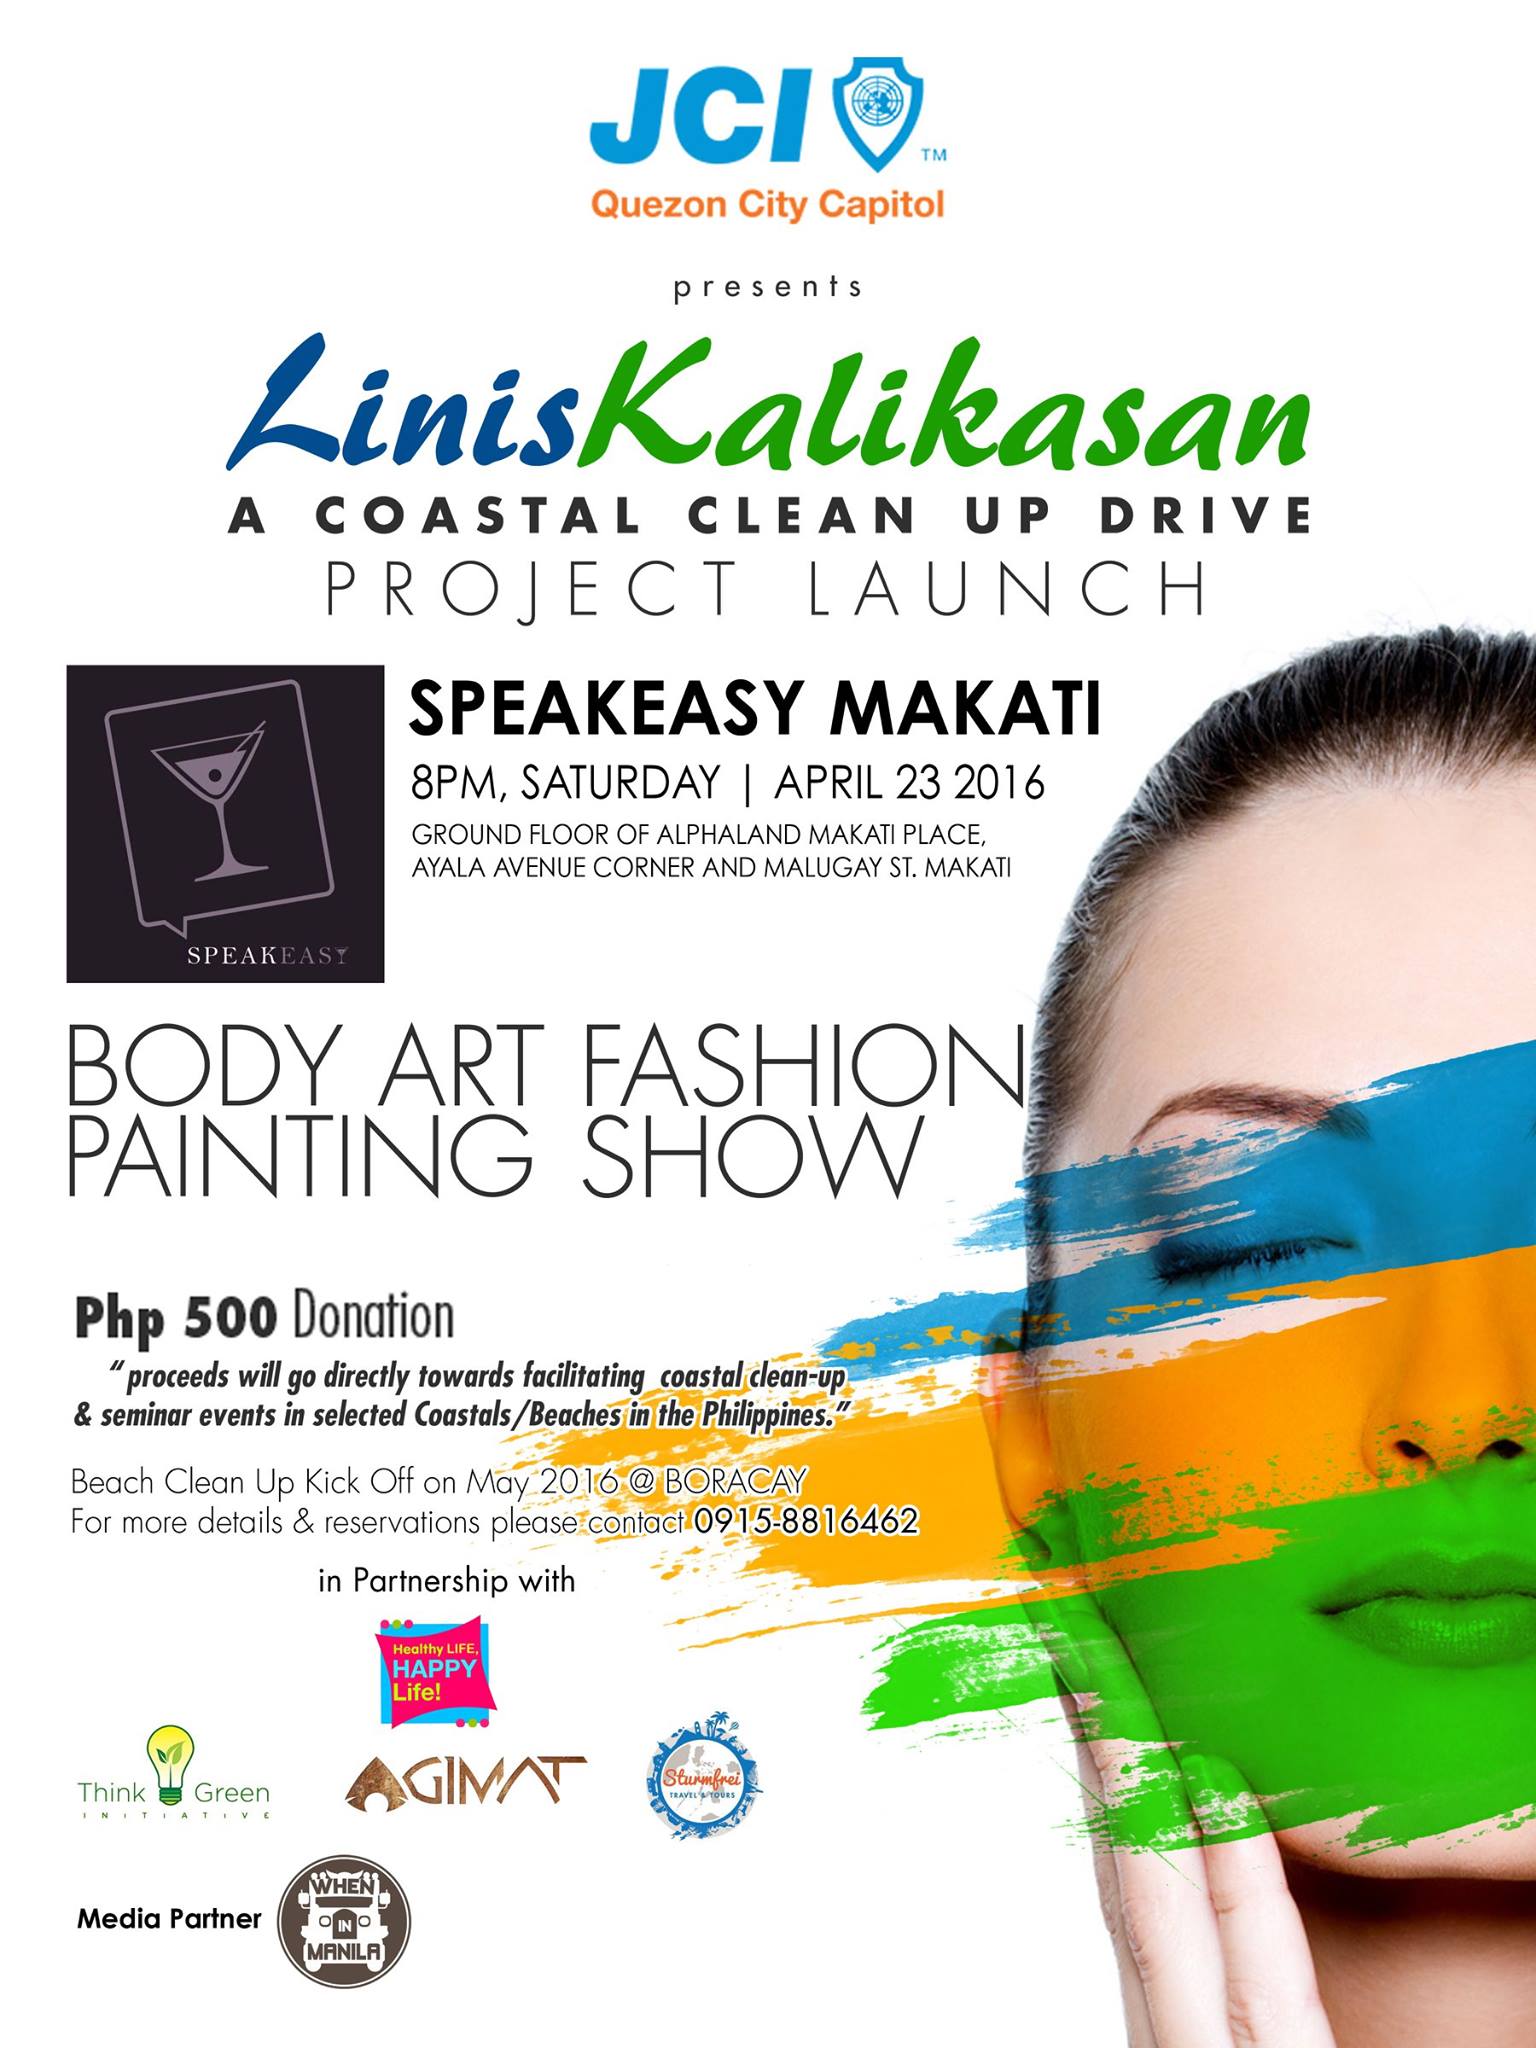 JCI QC Capitol LINIS KALIKASAN Project Launch clock April 23 – April 24 Apr 23 at 2 PM to Apr 24 at 5 AM pin Show Map Frazz Metrowalk Pasig, Philippines envelope LINIS KALIKASAN Project Launch is a benefit event for Enivromental Awanerness and Enviromental Protection. Proceeds will go directly towards facilitating coastal/beach clean-up & seminar events in Coastal/Beach in the Philippines. For participation or enquiries, please contact: Orly T. Darnayla LINIS KALIKASAN Project Chairman Email : orly.jcicapitolphilippines / Mobile # 0915-8816462 and Jandrick De Castro LINIS KALIKASAN Co-Chairman Mobilne # 09178908752